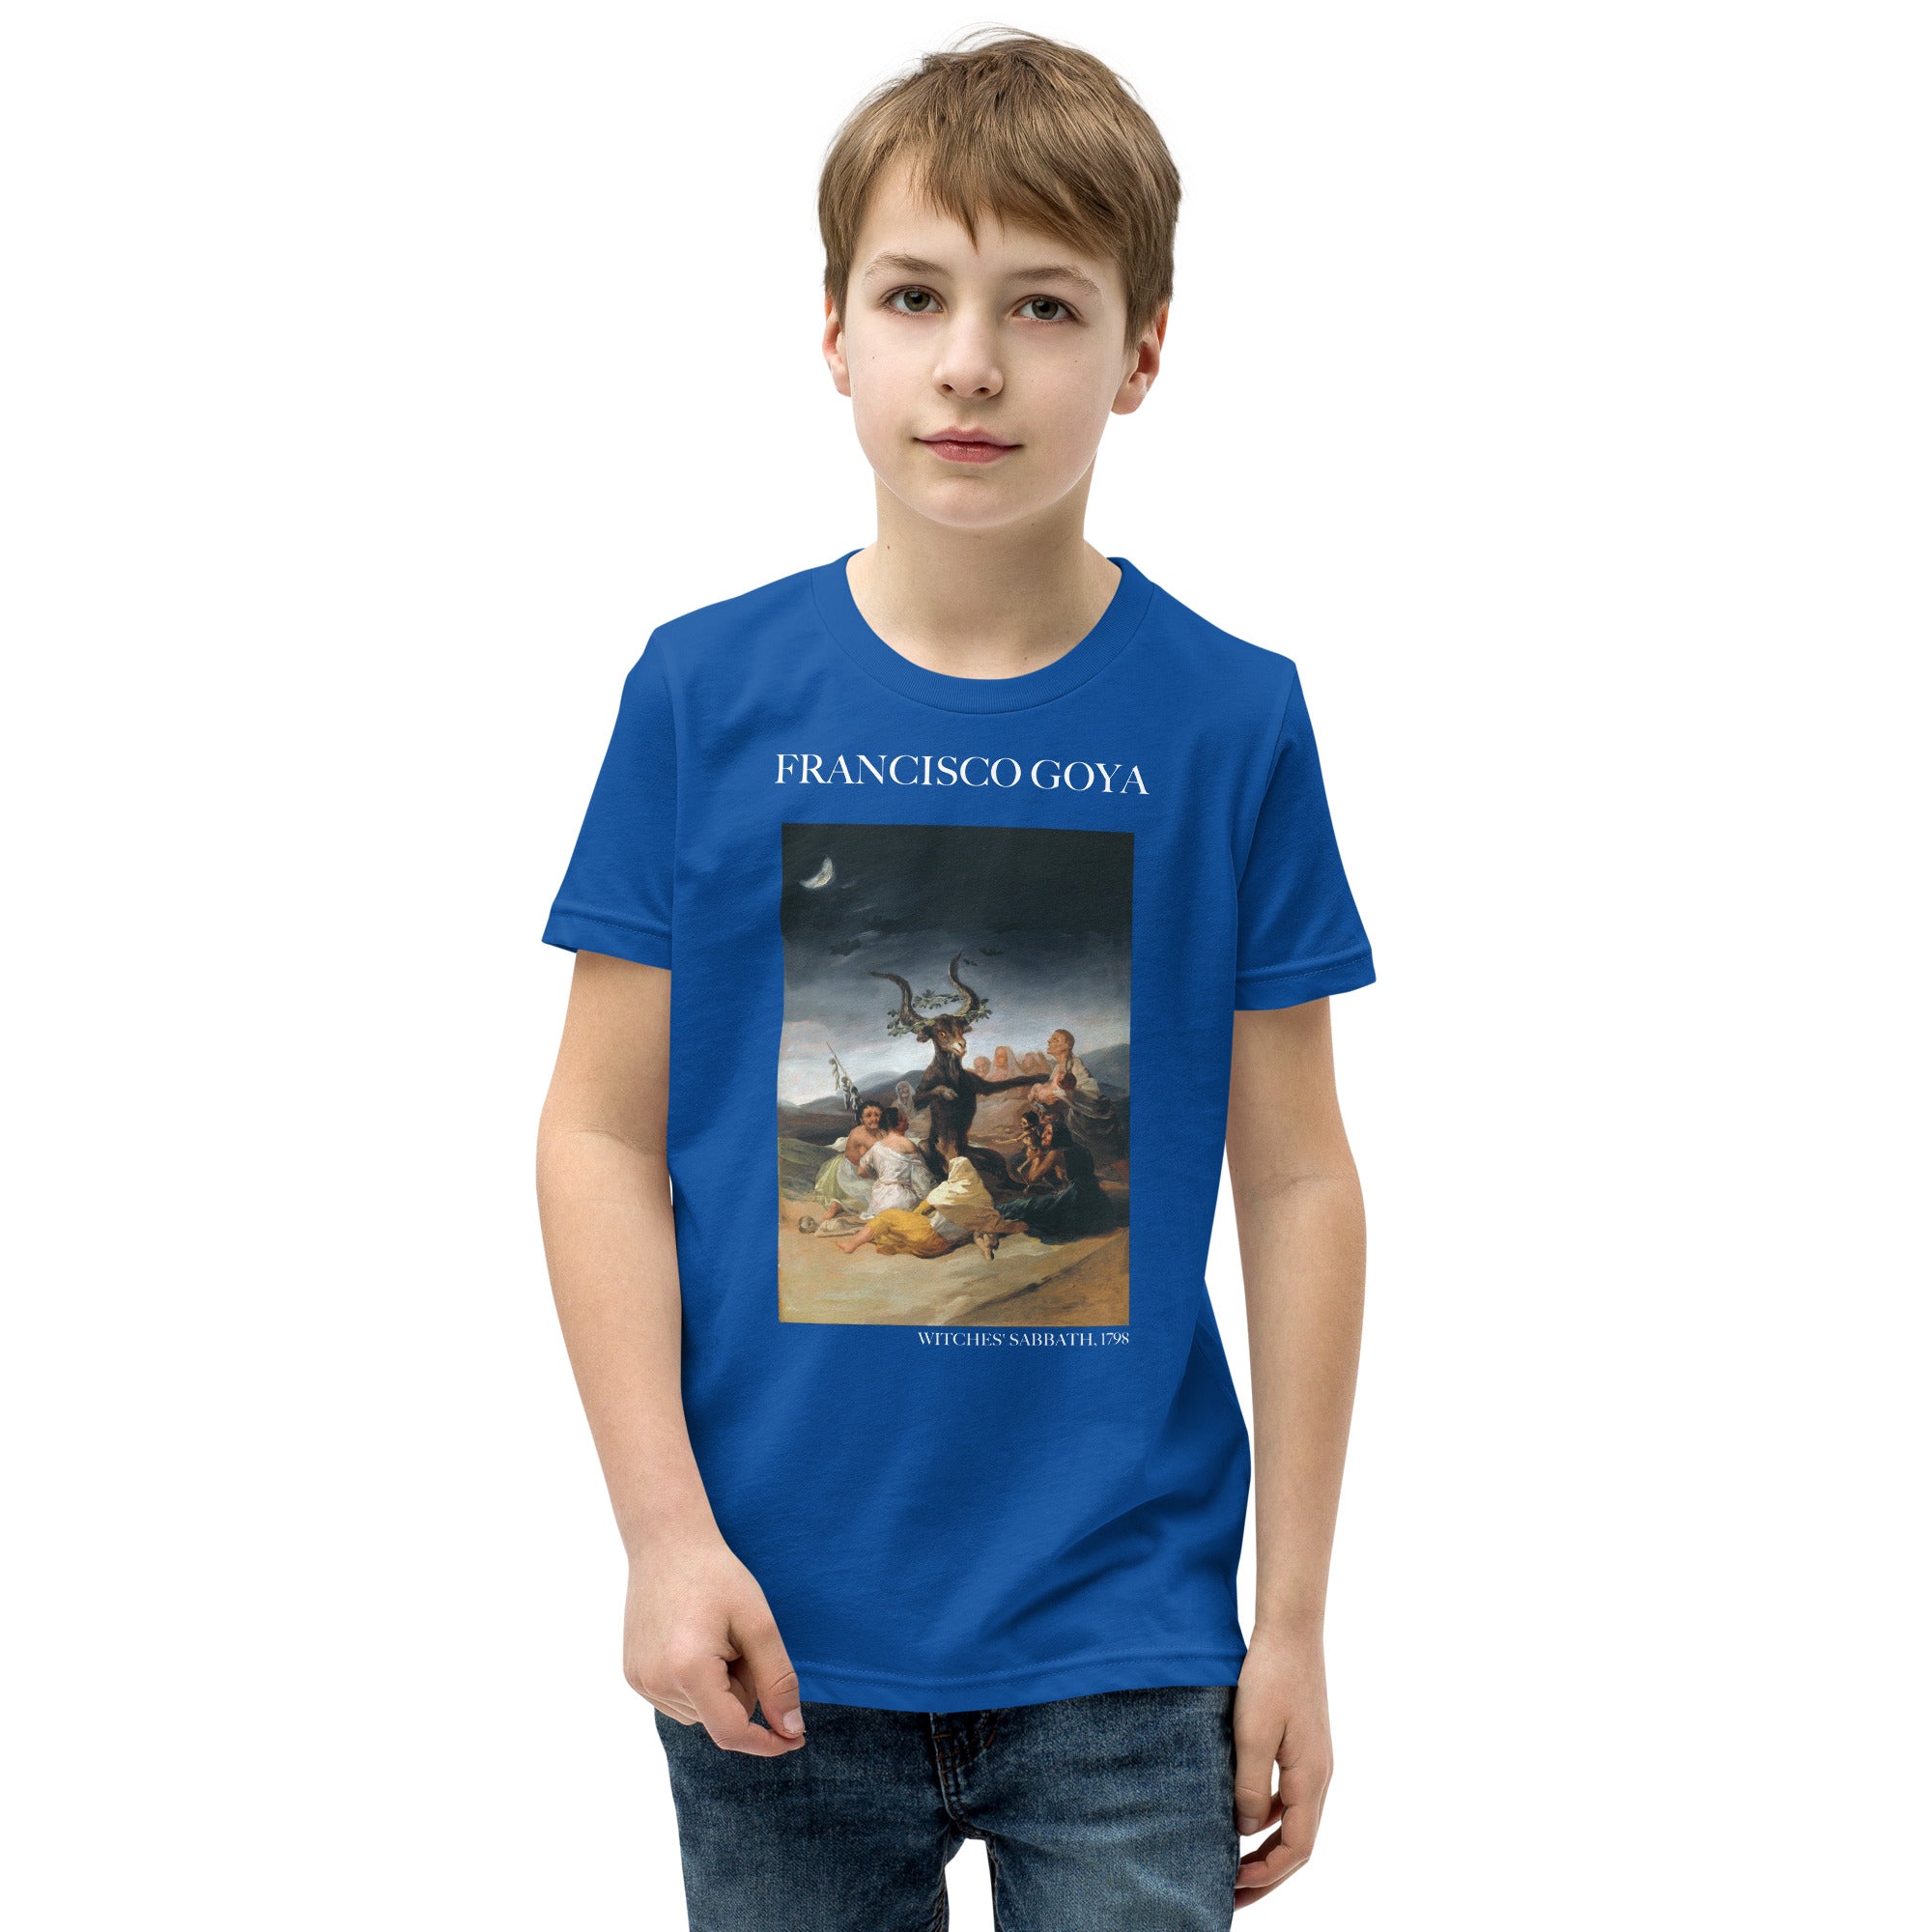 Francisco Goya 'Witches' Sabbath' Famous Painting Short Sleeve T-Shirt | Premium Youth Art Tee